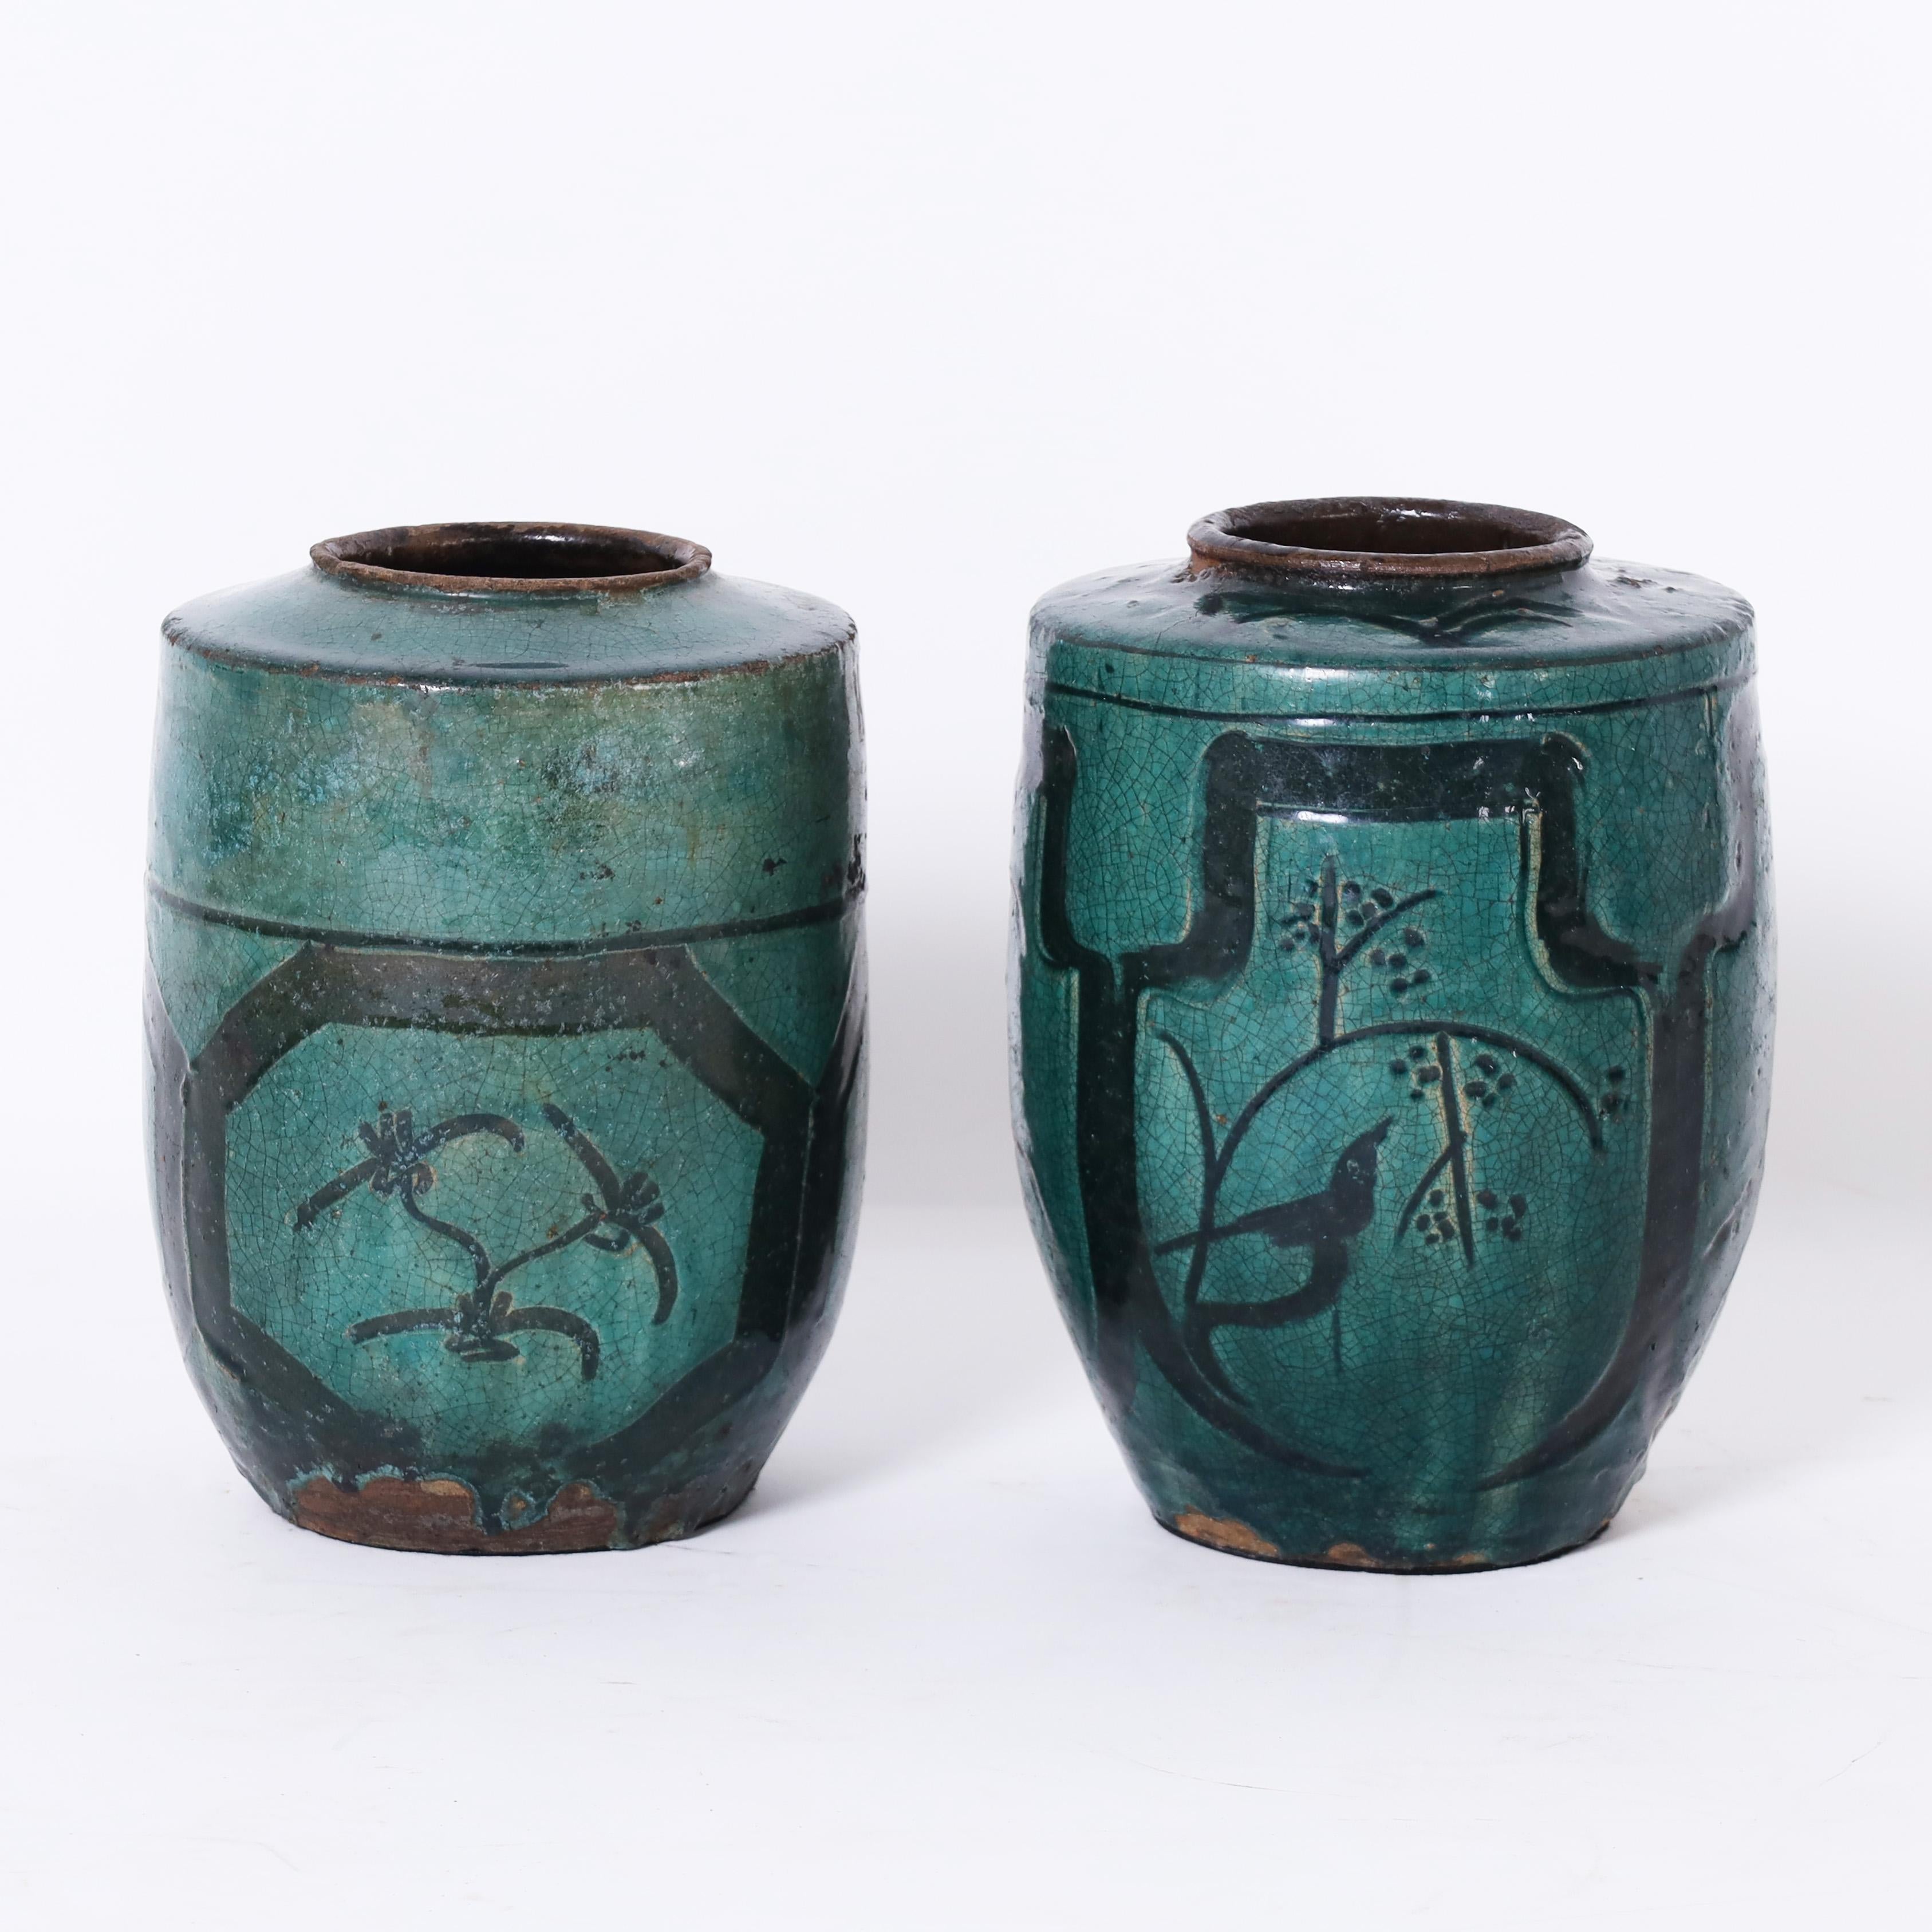 Rare and unusual pair of 18th century Persian vases handcrafted in terra cotta and decorated with birds, flowers, and an unconventional Asian motif, then glazed, now crackled and aged to perfection.